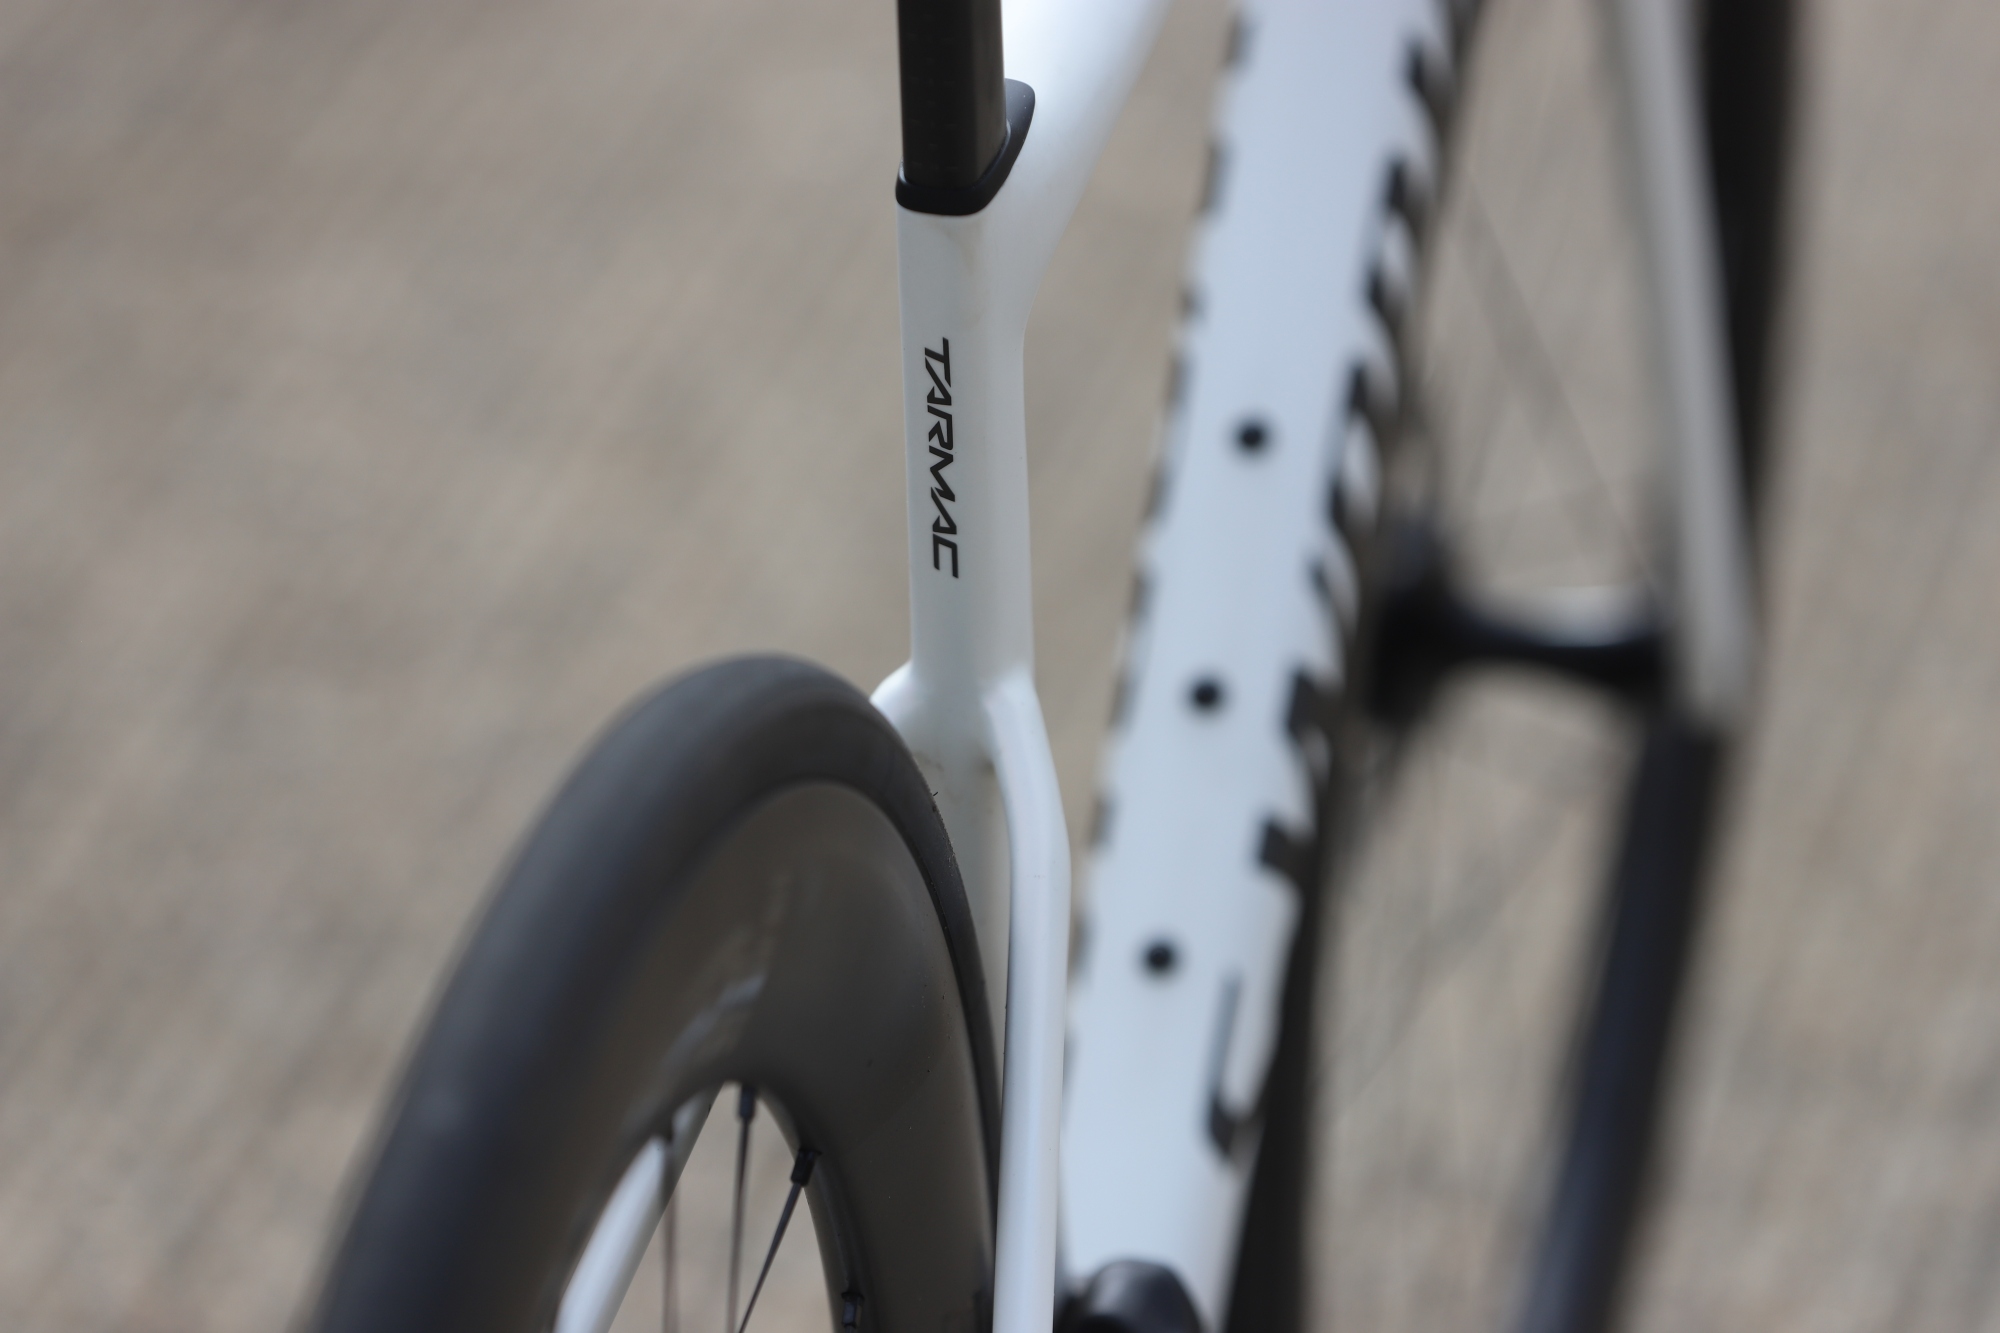 Detail of Specialized S-Works Tarmac SL8 seat tube